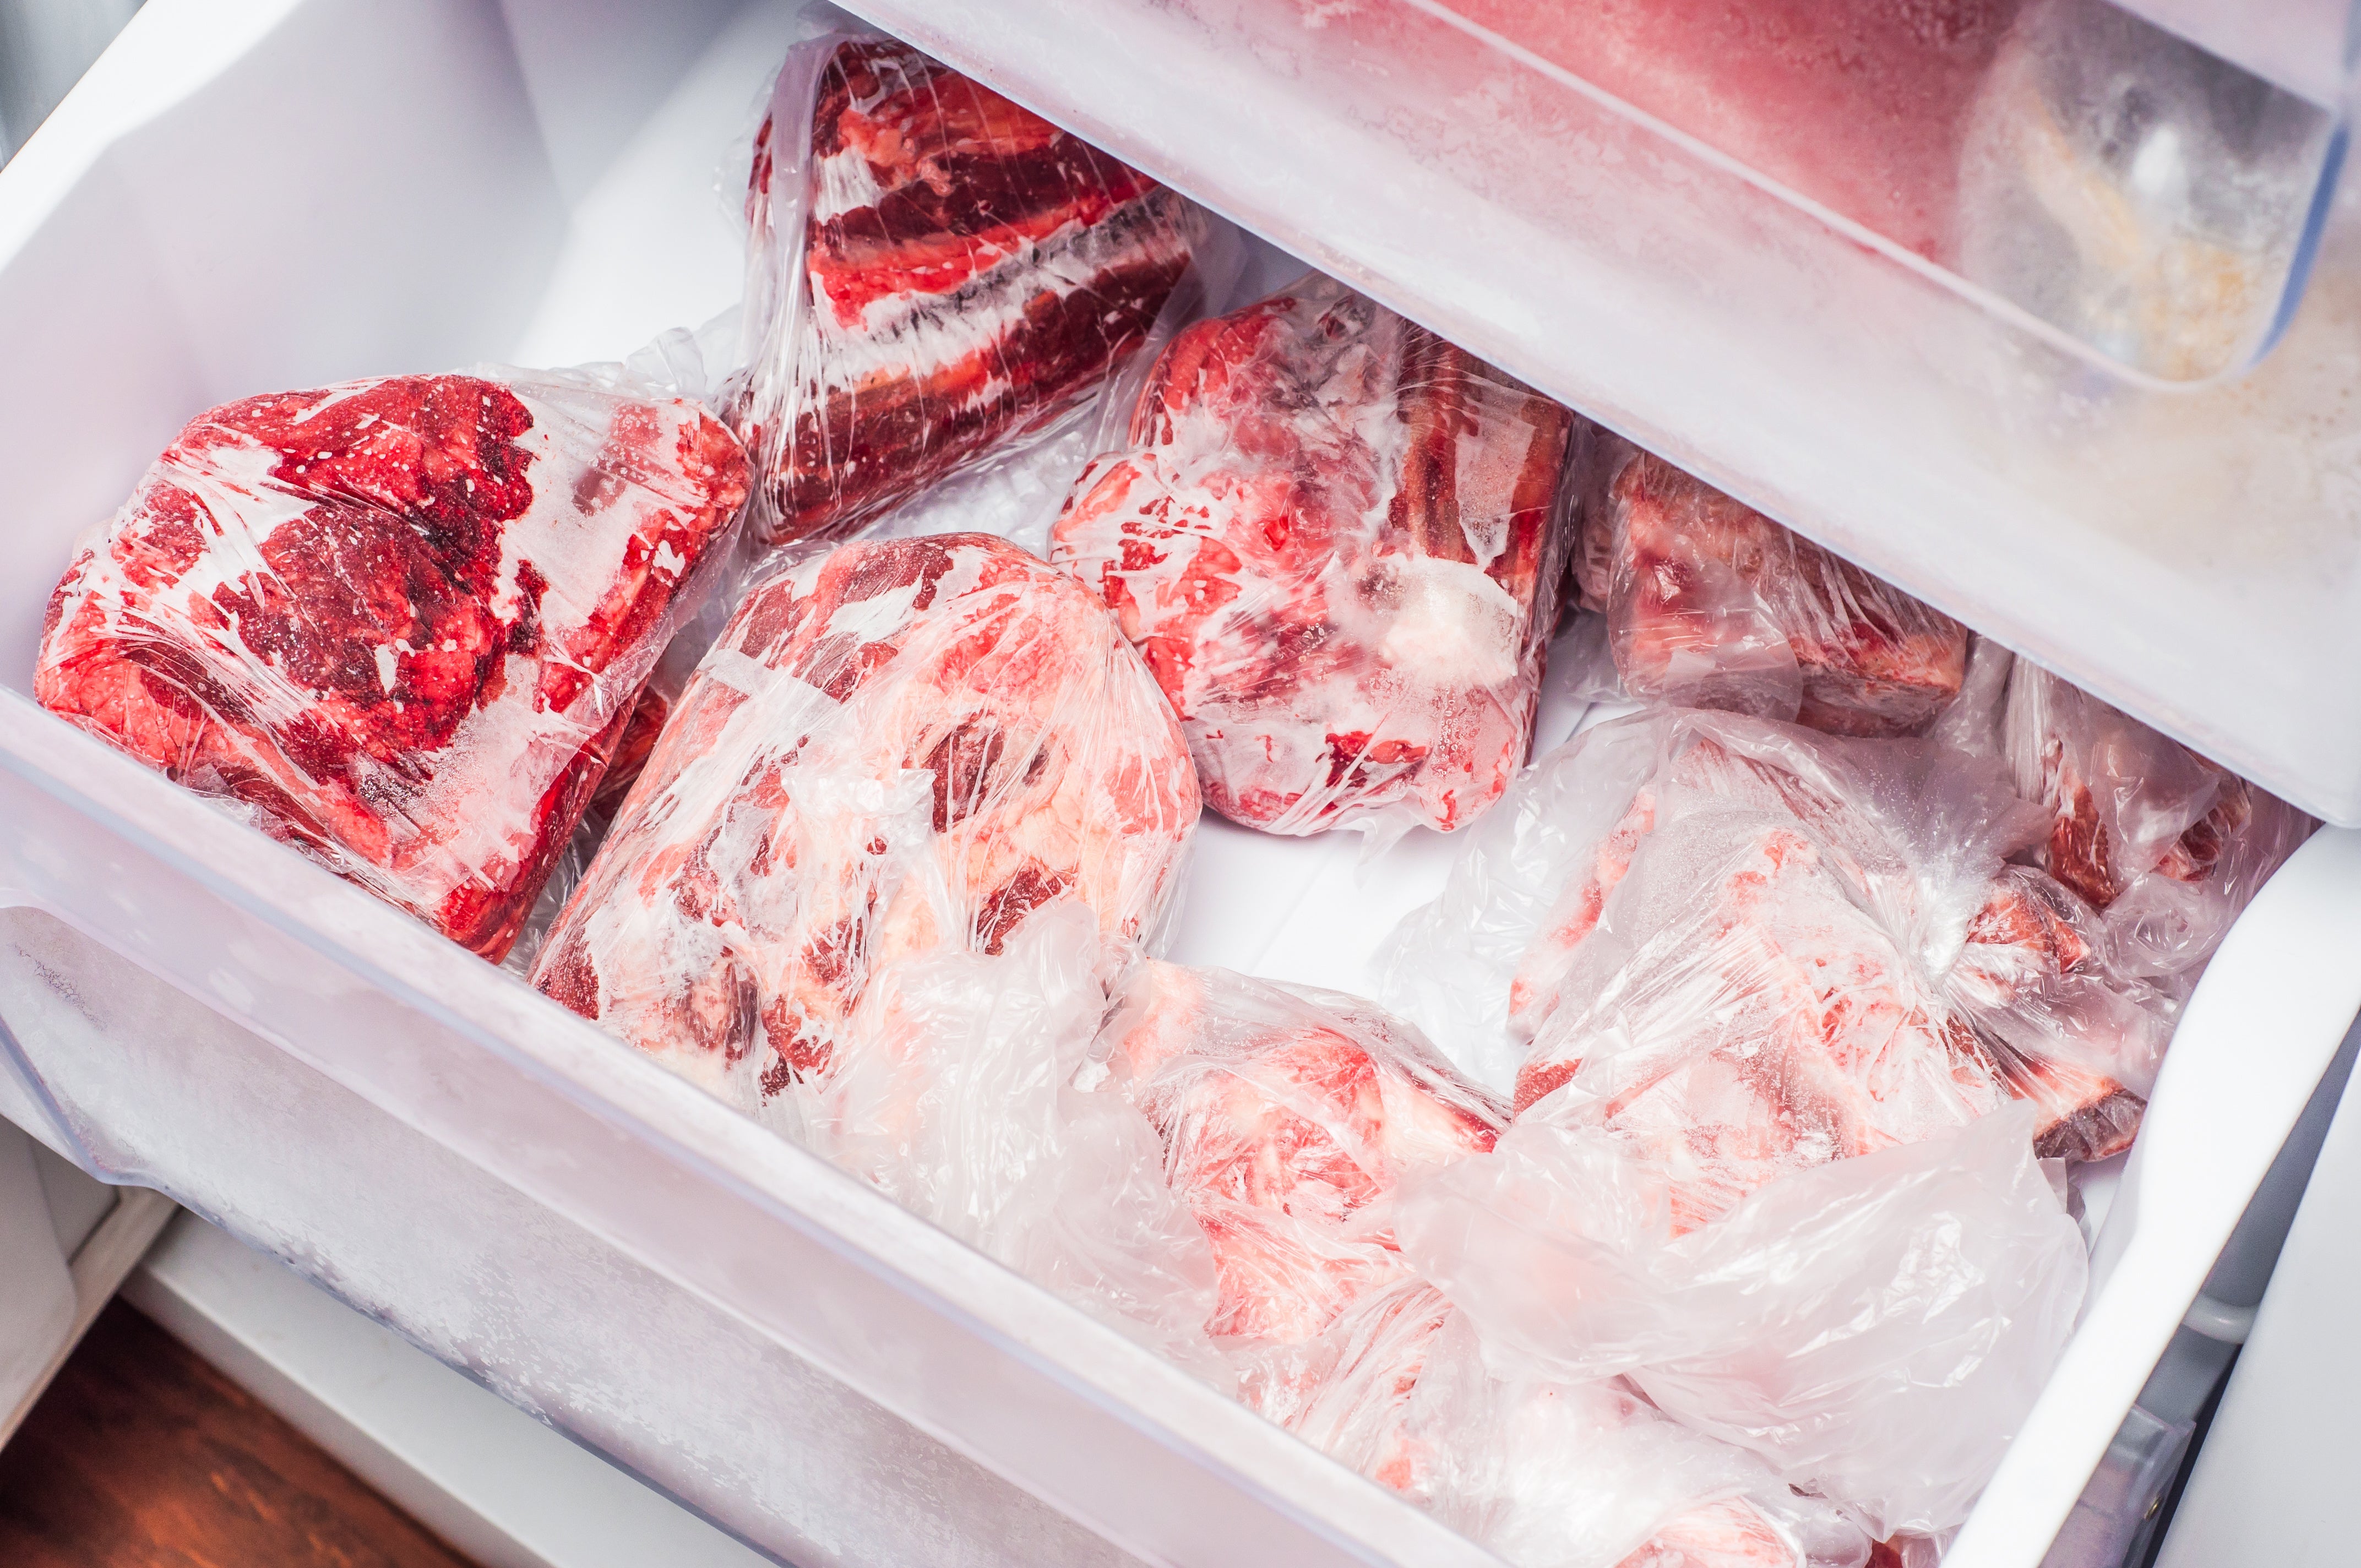 Can I Cook Frozen Steak? Answers to FAQs About Thawing Frozen Meat